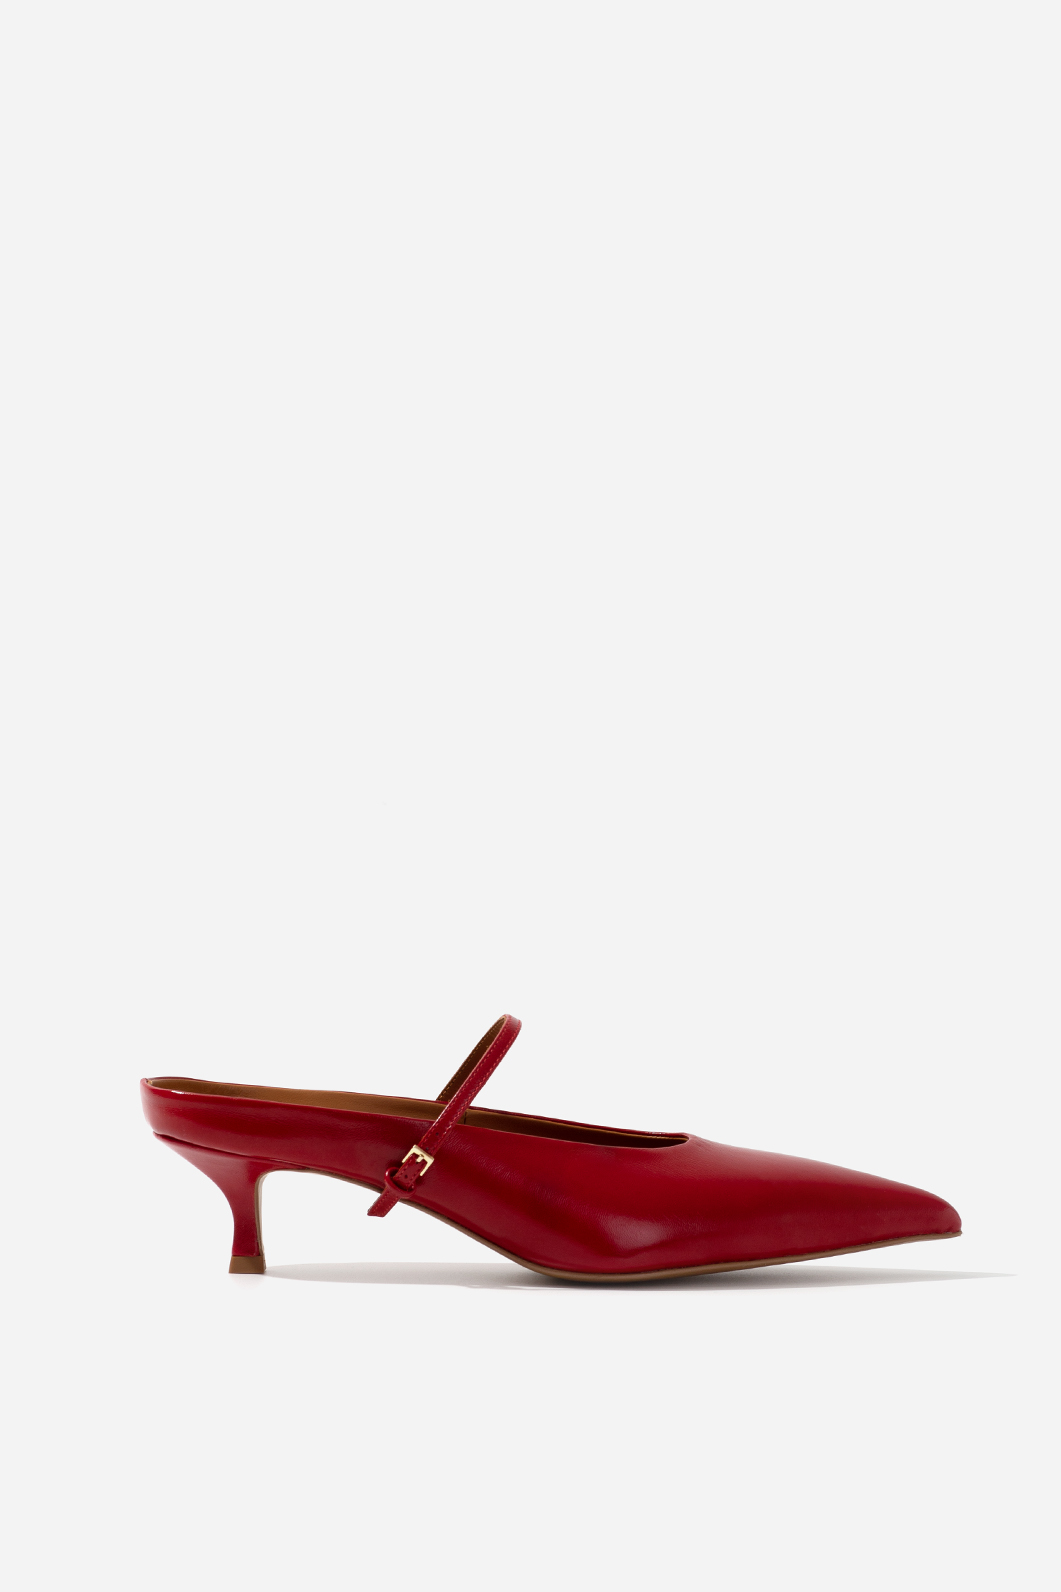 Rachel red leather mules